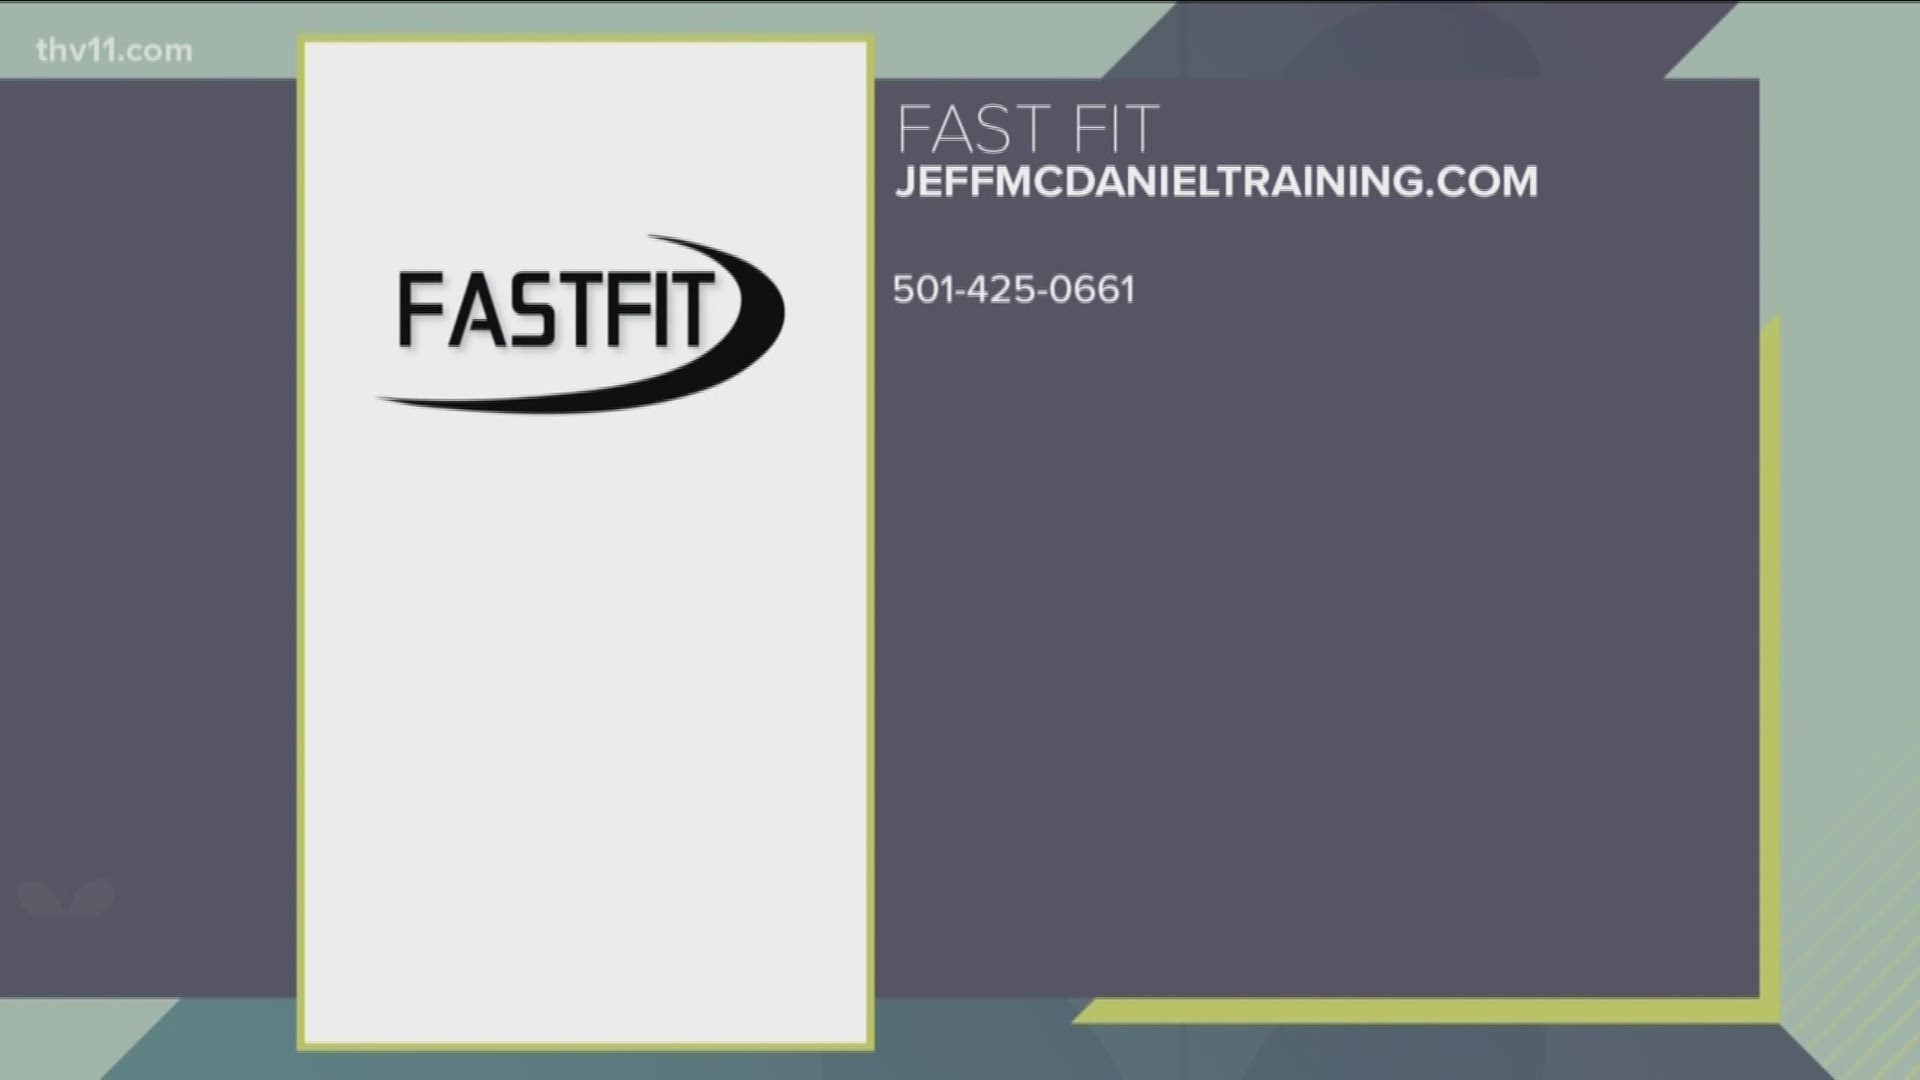 Hips didn't lie this morning with Jeff McDaniel from Fast Fit!